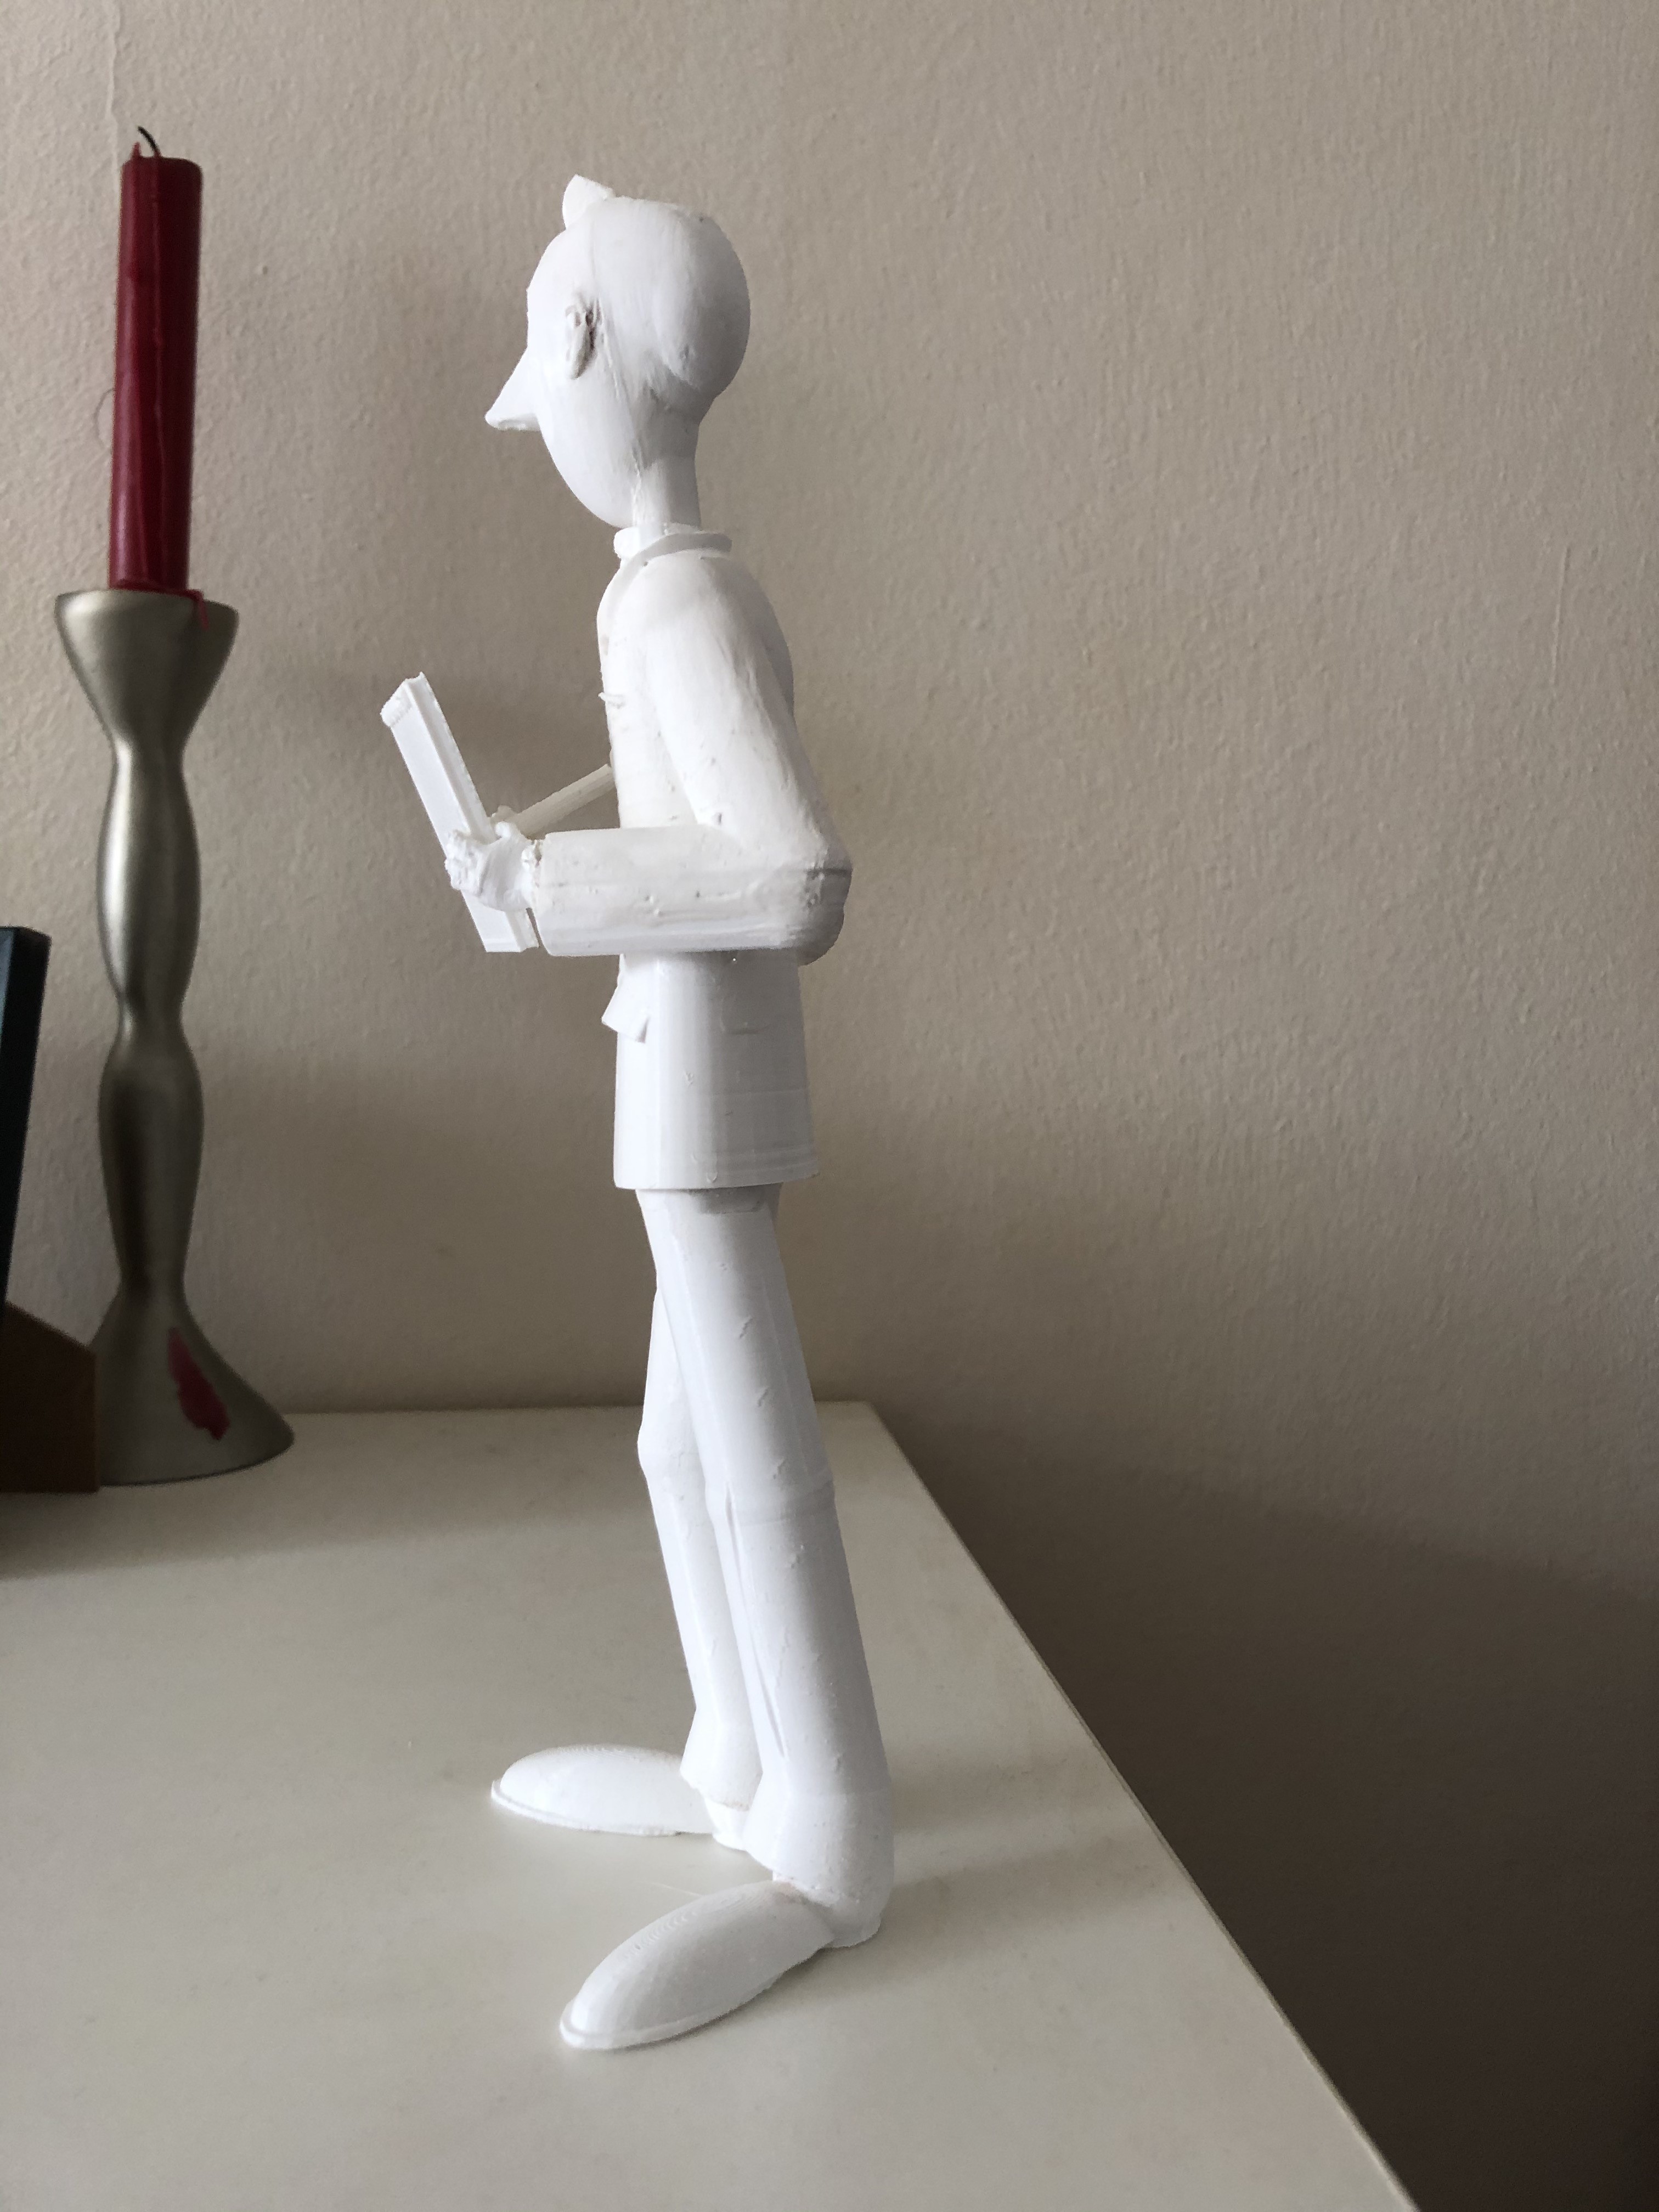 Herge creator of Tintin and others 3D Print 379058